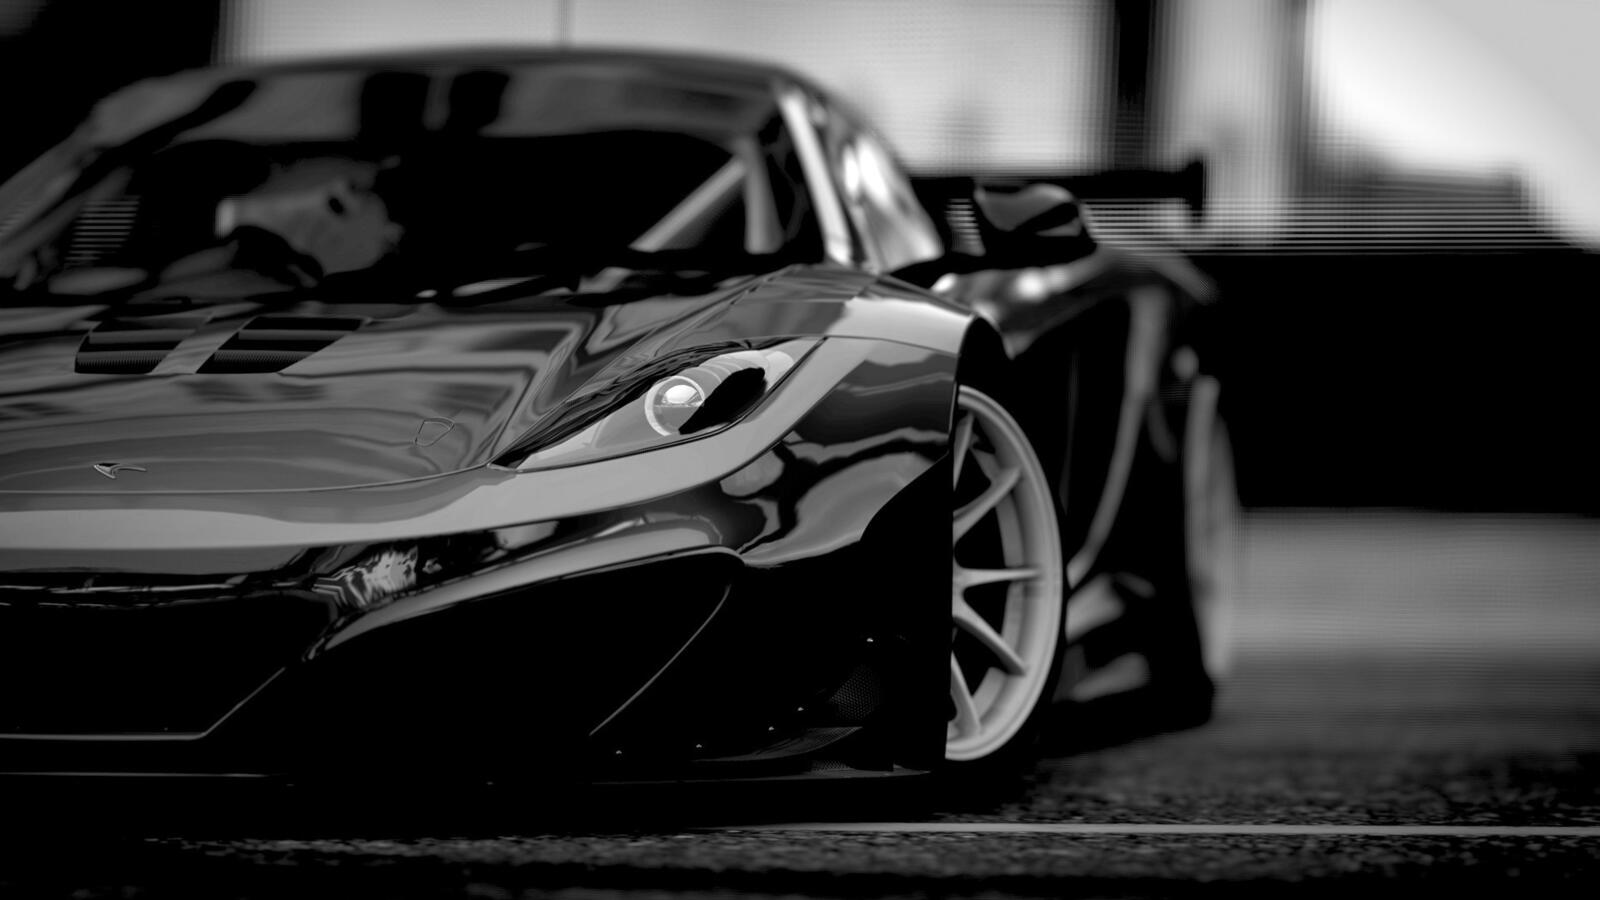 Free photo Cool sports car on monochrome picture for pc